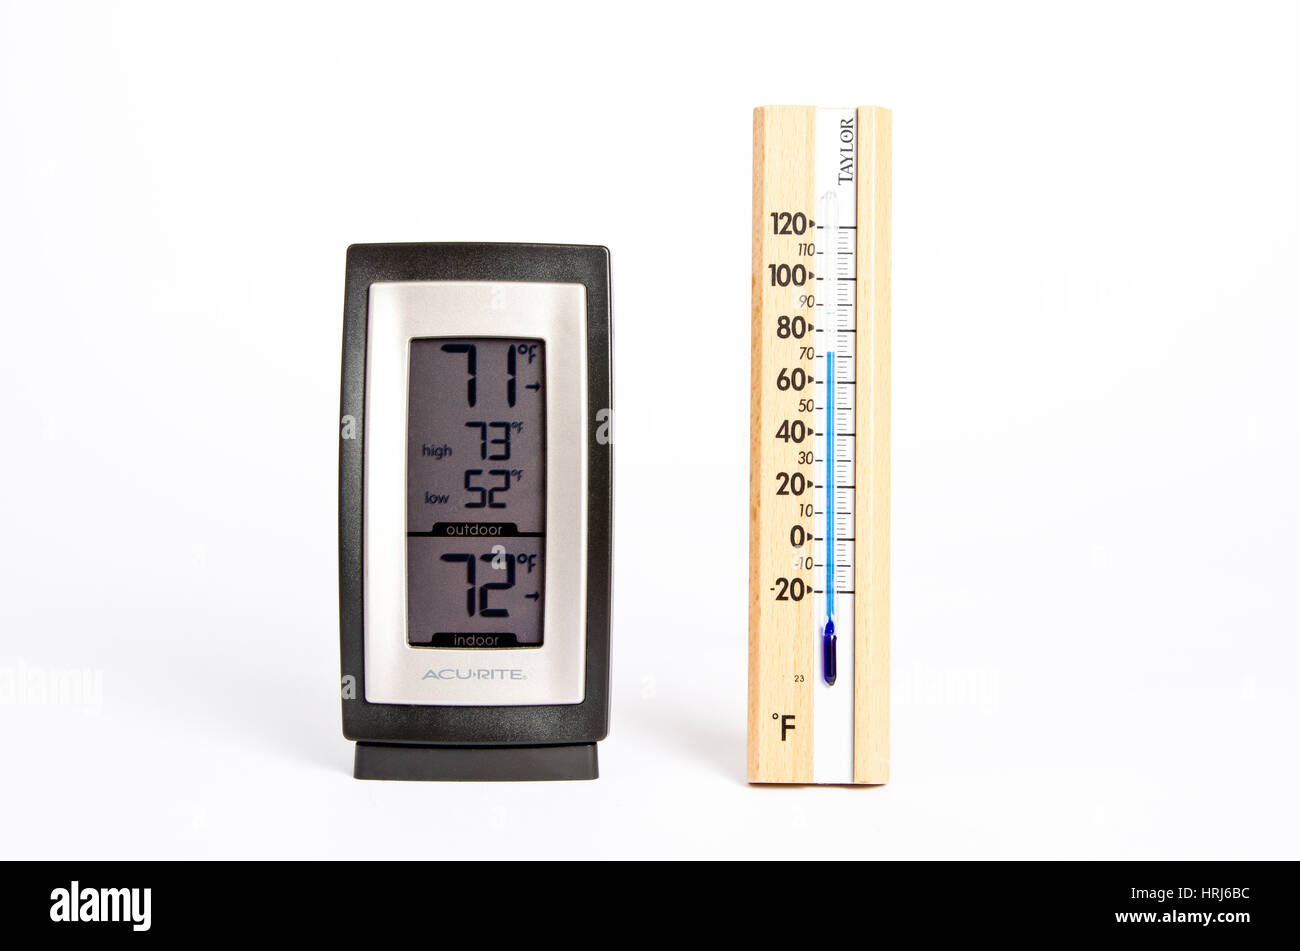 https://c8.alamy.com/comp/HRJ6BC/electronic-and-glass-thermometer-HRJ6BC.jpg